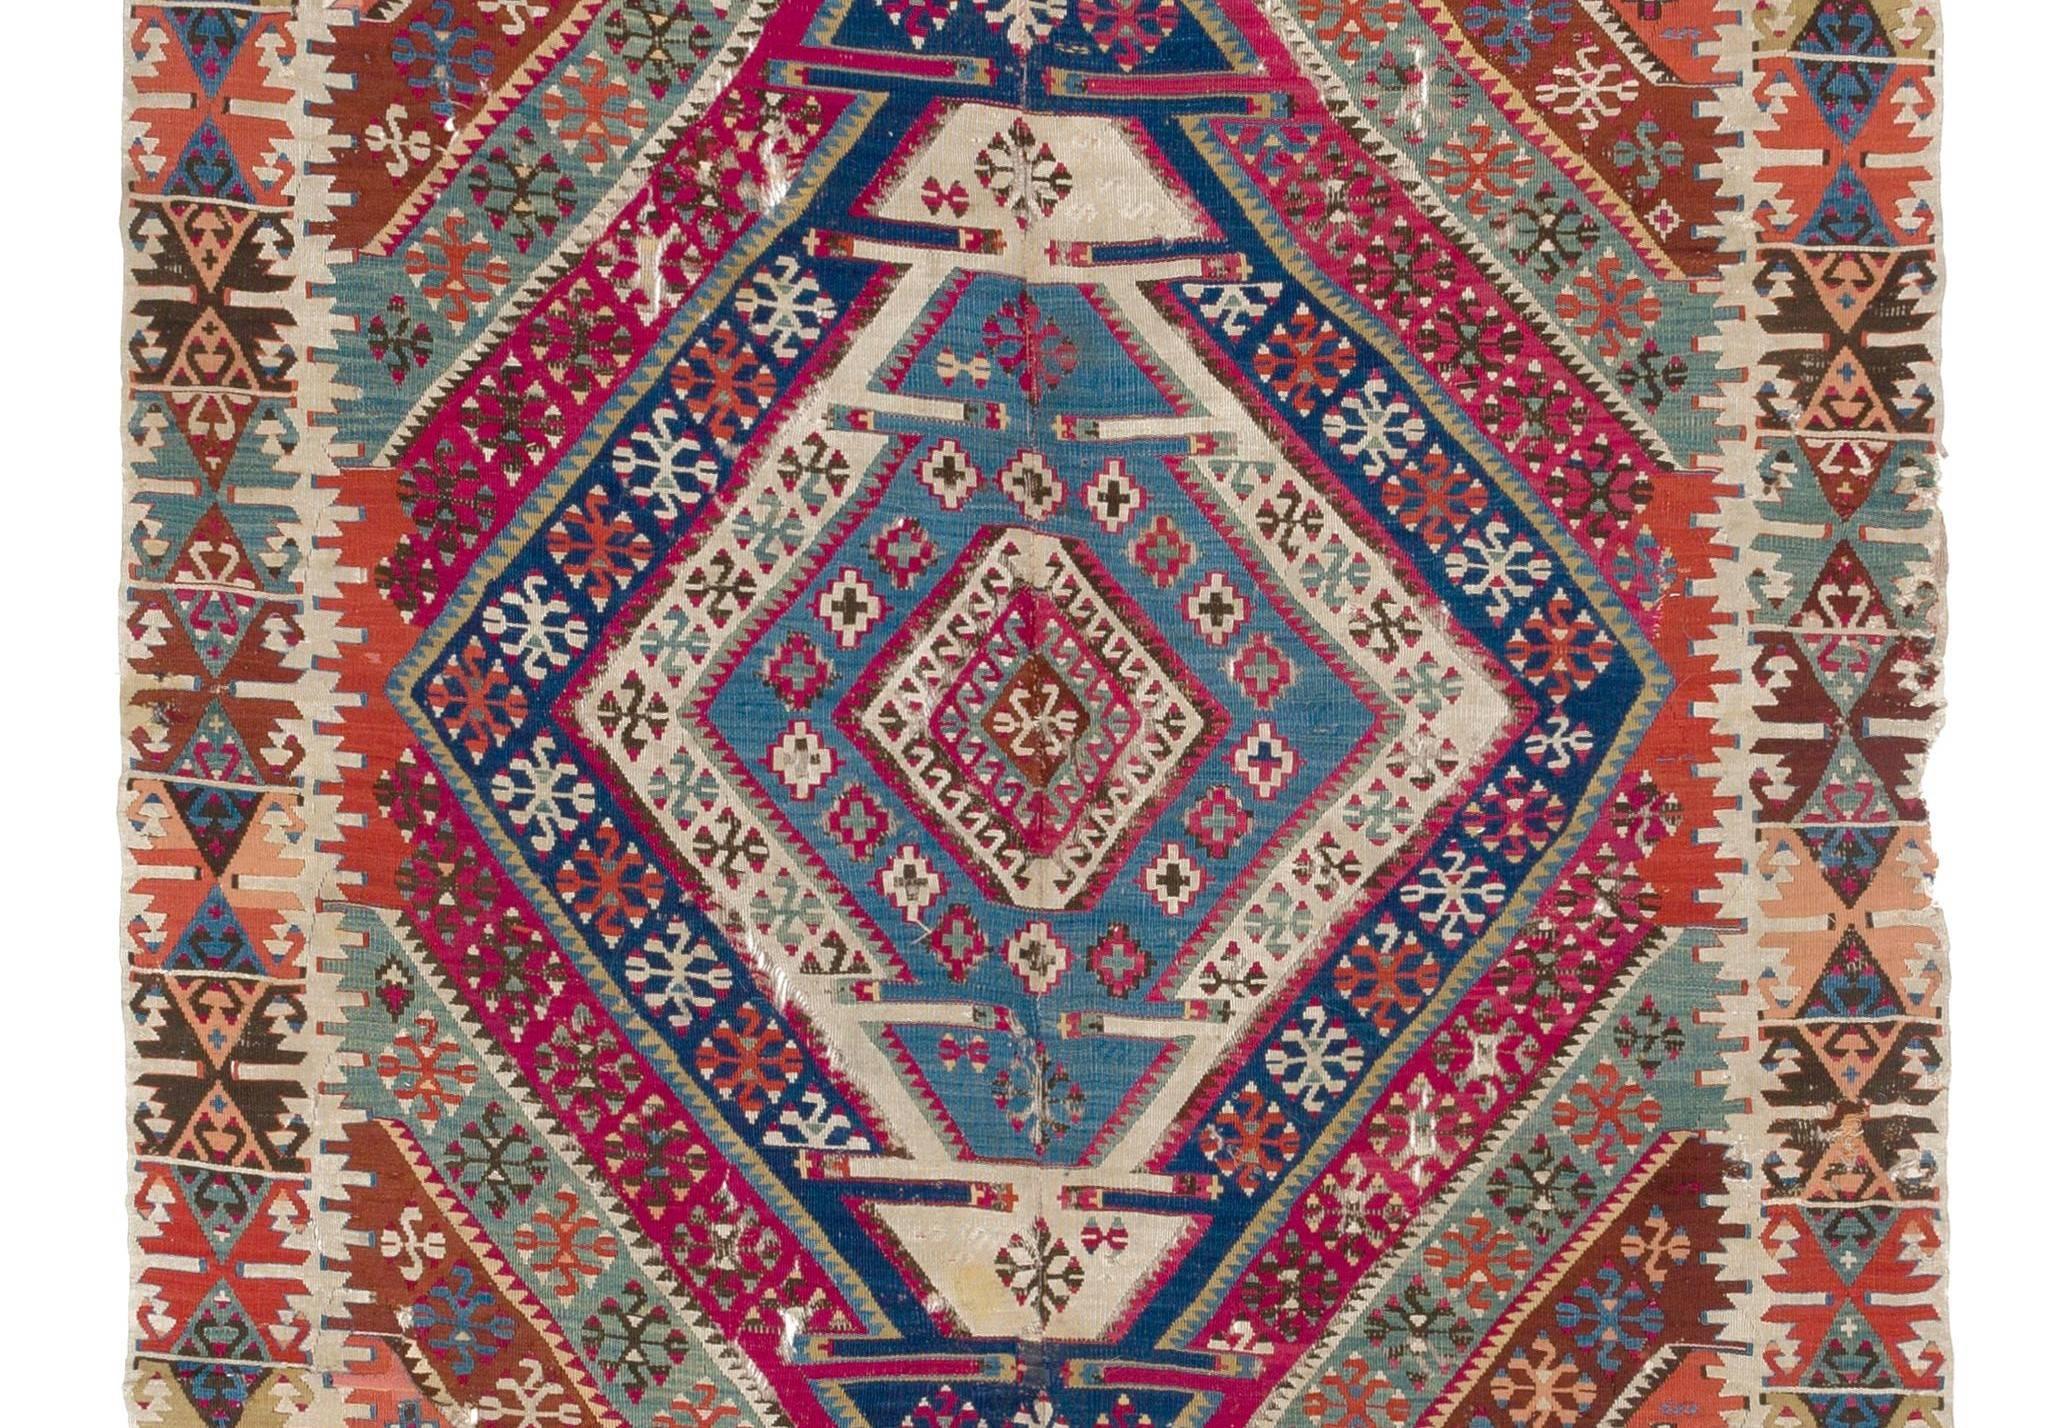 A splendid antique Kilim (flat-woven rug) from East Anatolia. Traditionally the rug is finely hand-woven in two panels and connected in the center, it is made of wool and the colors are all sourced from natural vegetal dyes. Measures: 5 x 13.5 Ft.